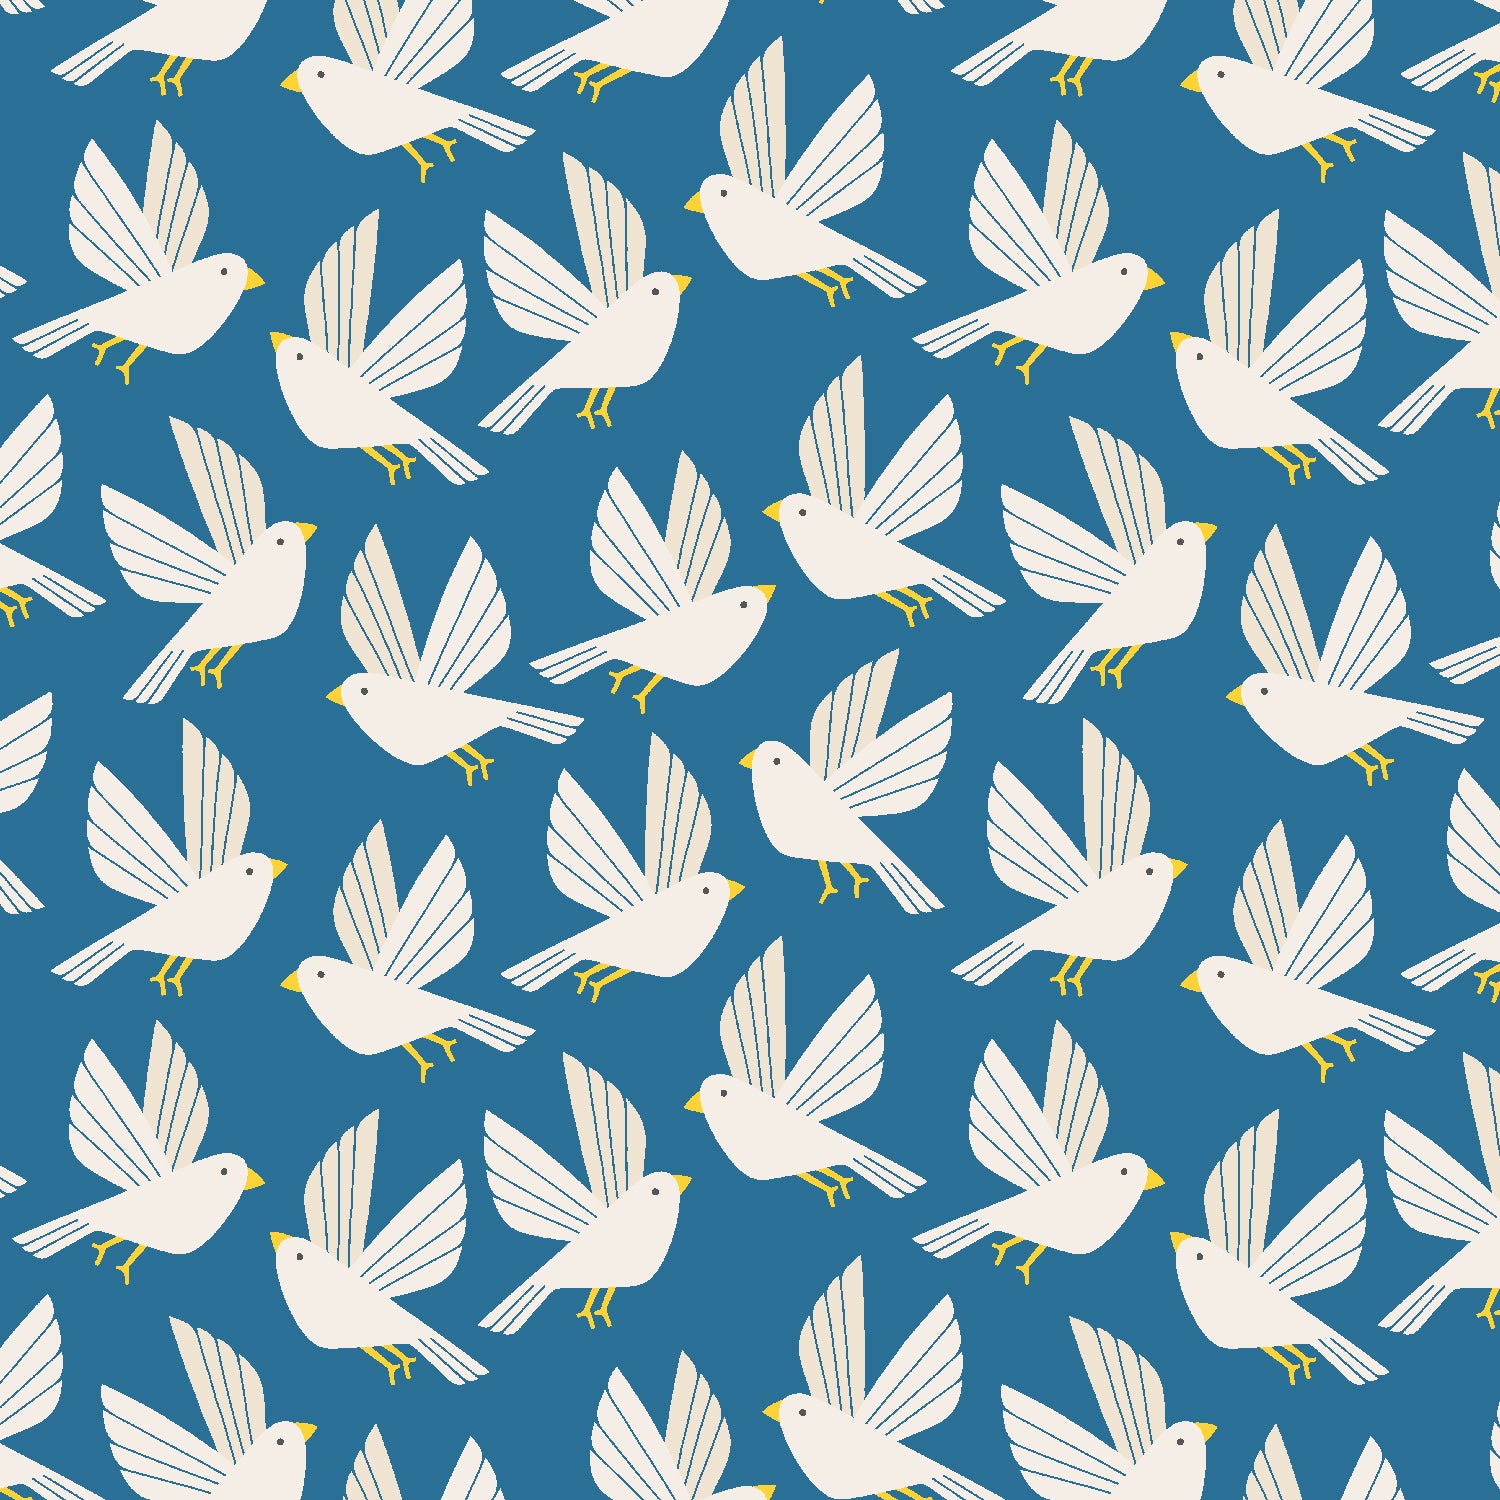 Wild and Free Quilt Fabric - Free as a Bird in Rocky Mountain Sky Blue - LV601-RM1